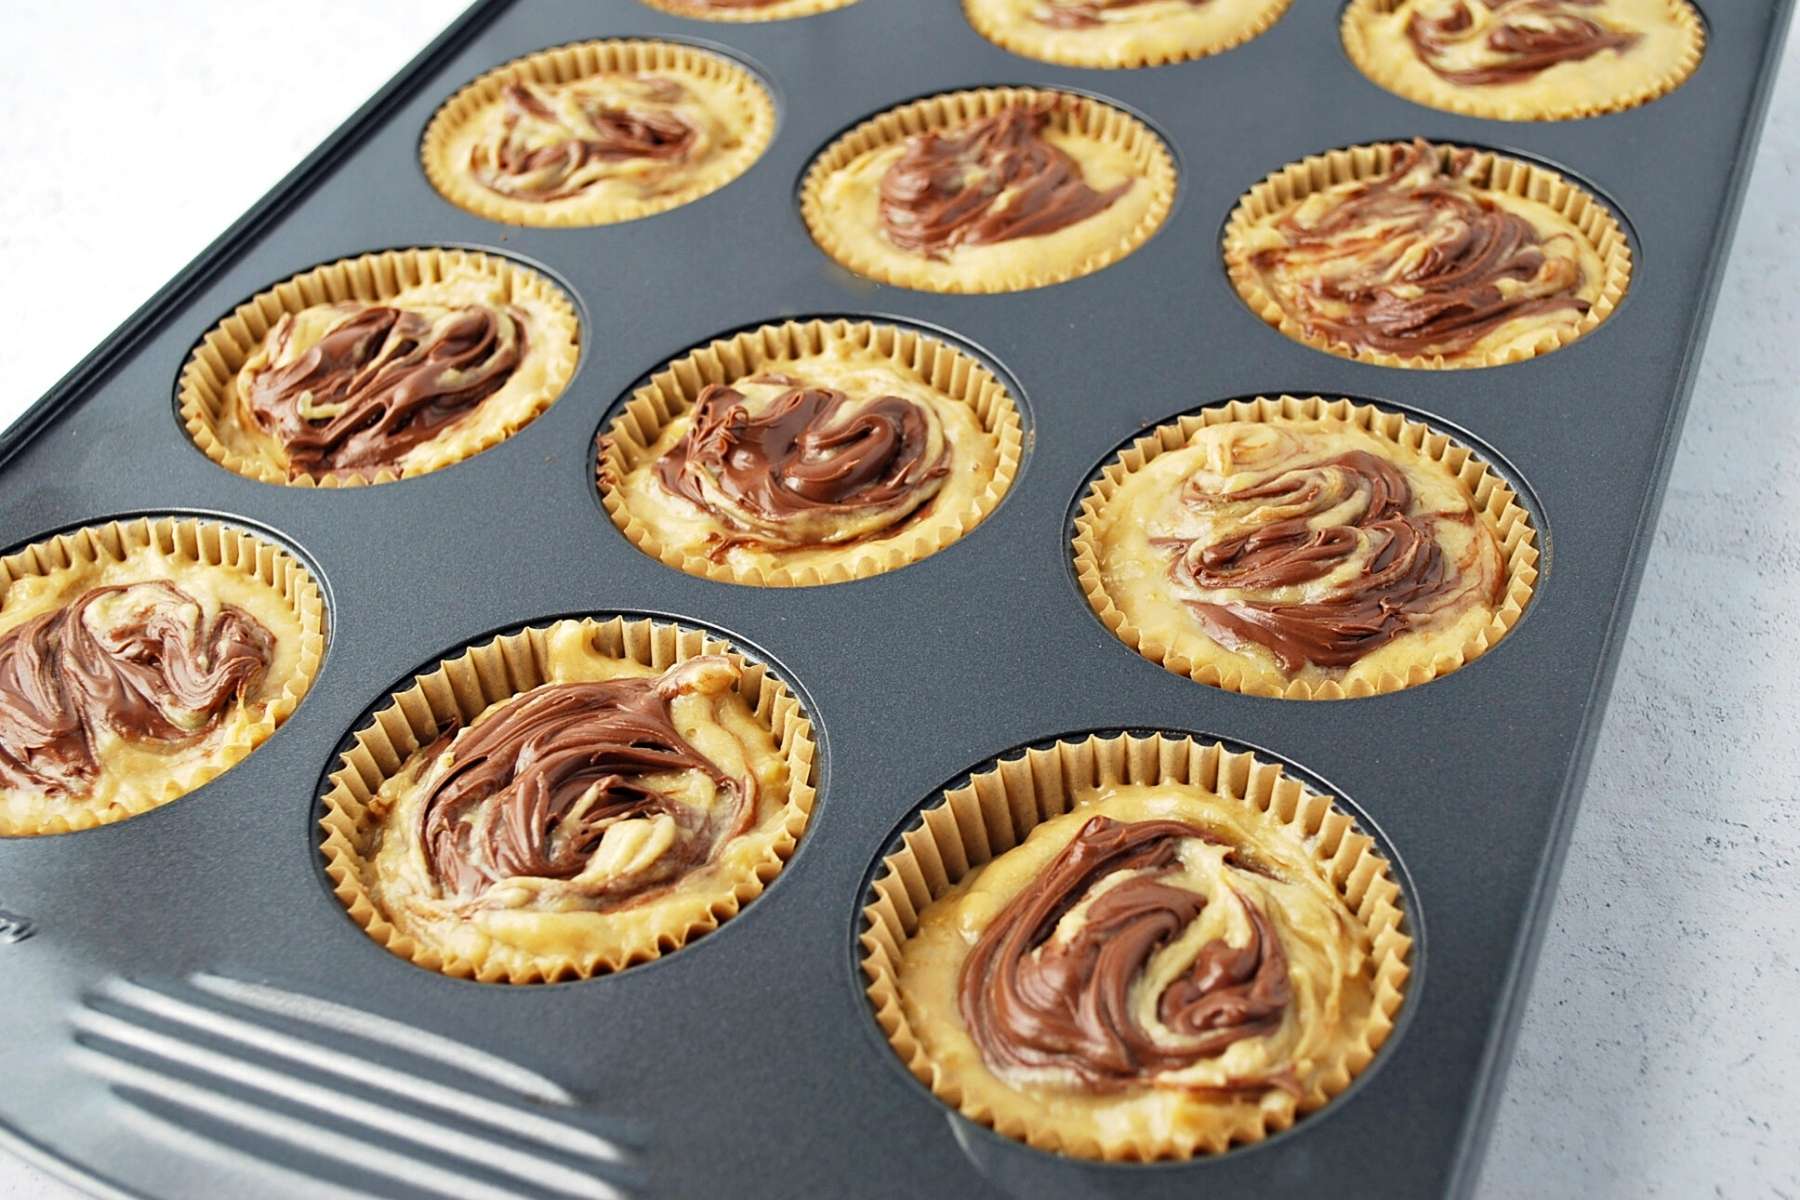 banana Nutella muffins ready to bake in a muffin pan